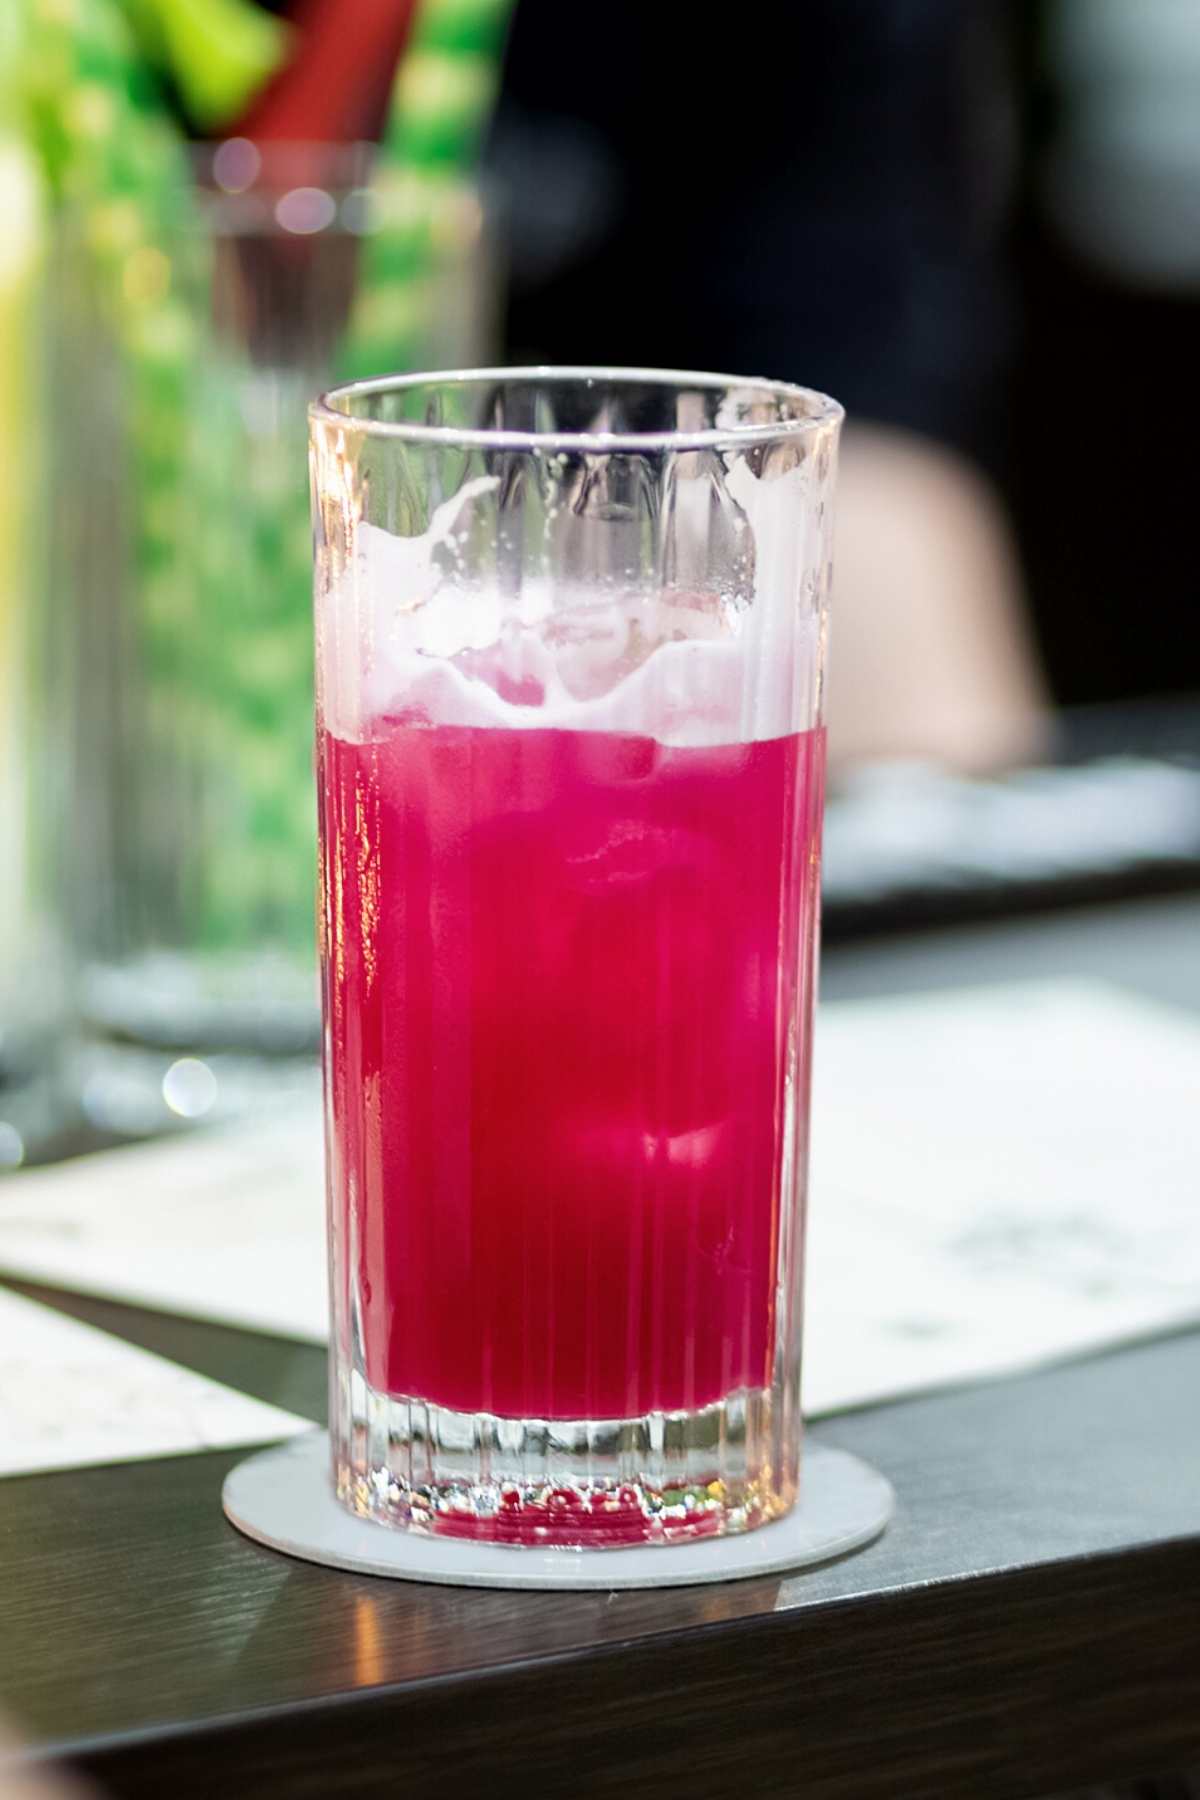 Add this Purple Passion cocktail to the bar menu at your next party! It’s a delicious combination of grapefruit juice, cranberry juice, vodka, and grenadine.